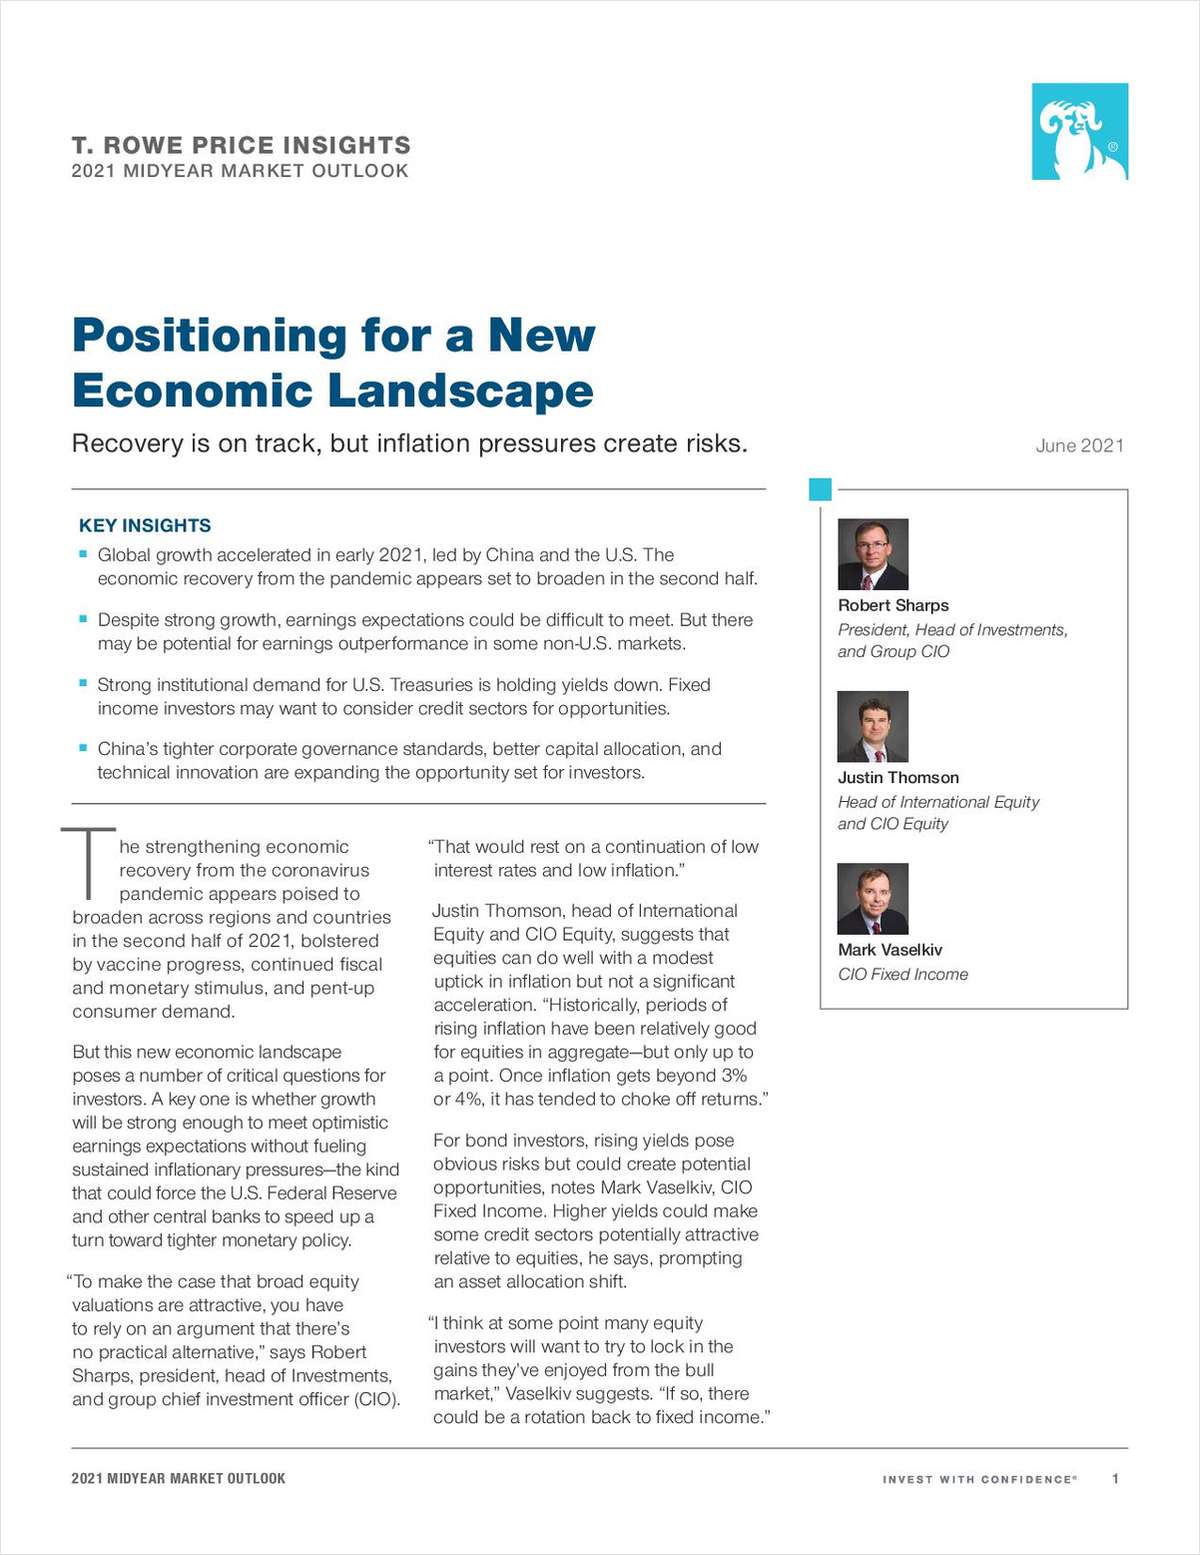 Positioning for a New Economic Landscape